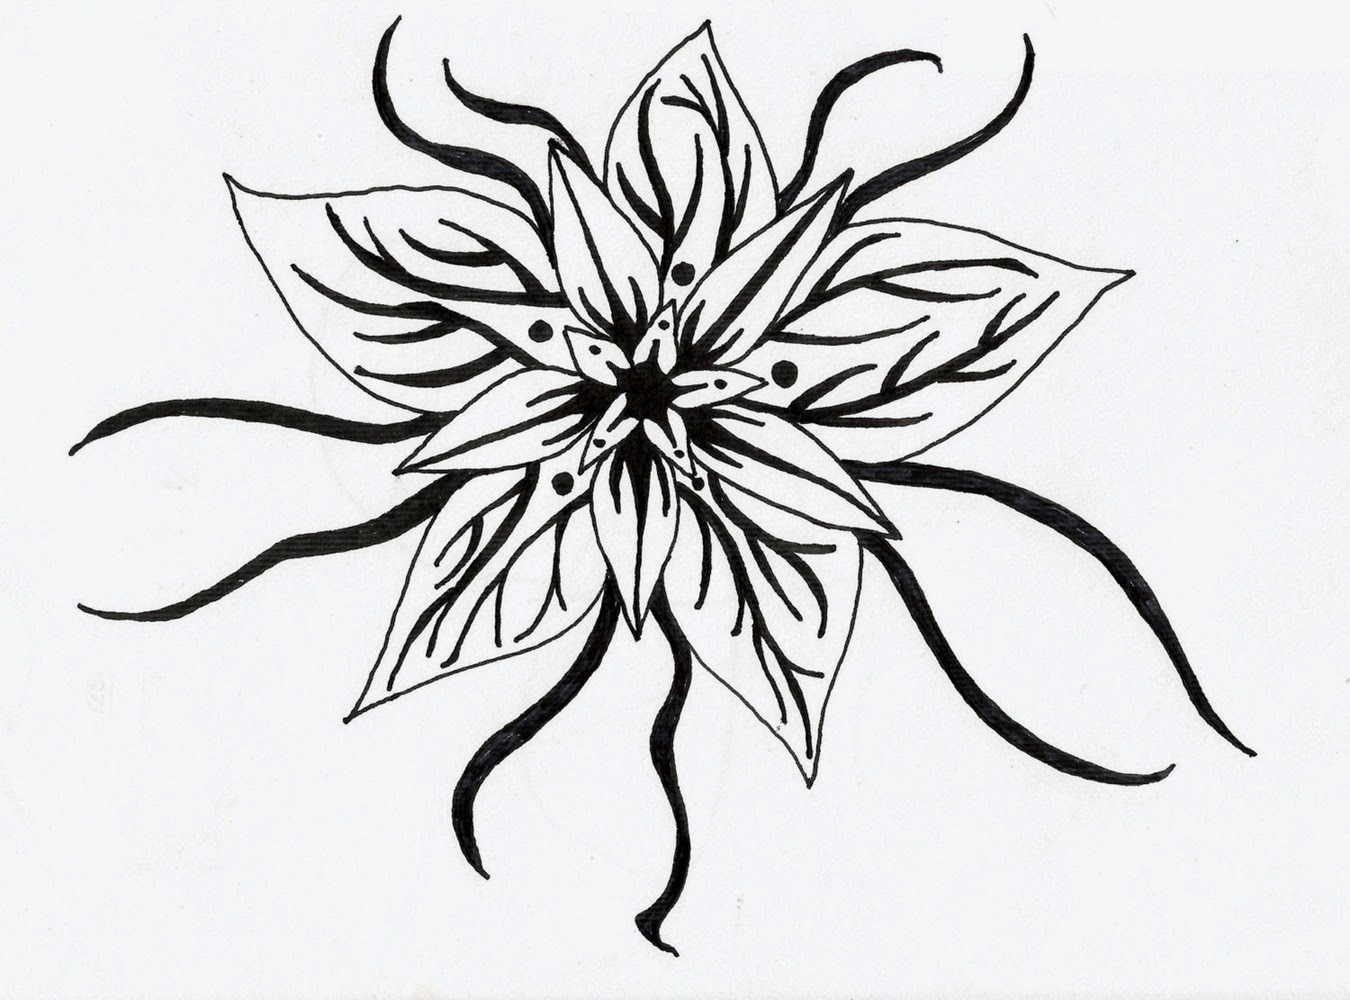 Cool Black and White Flower Designs